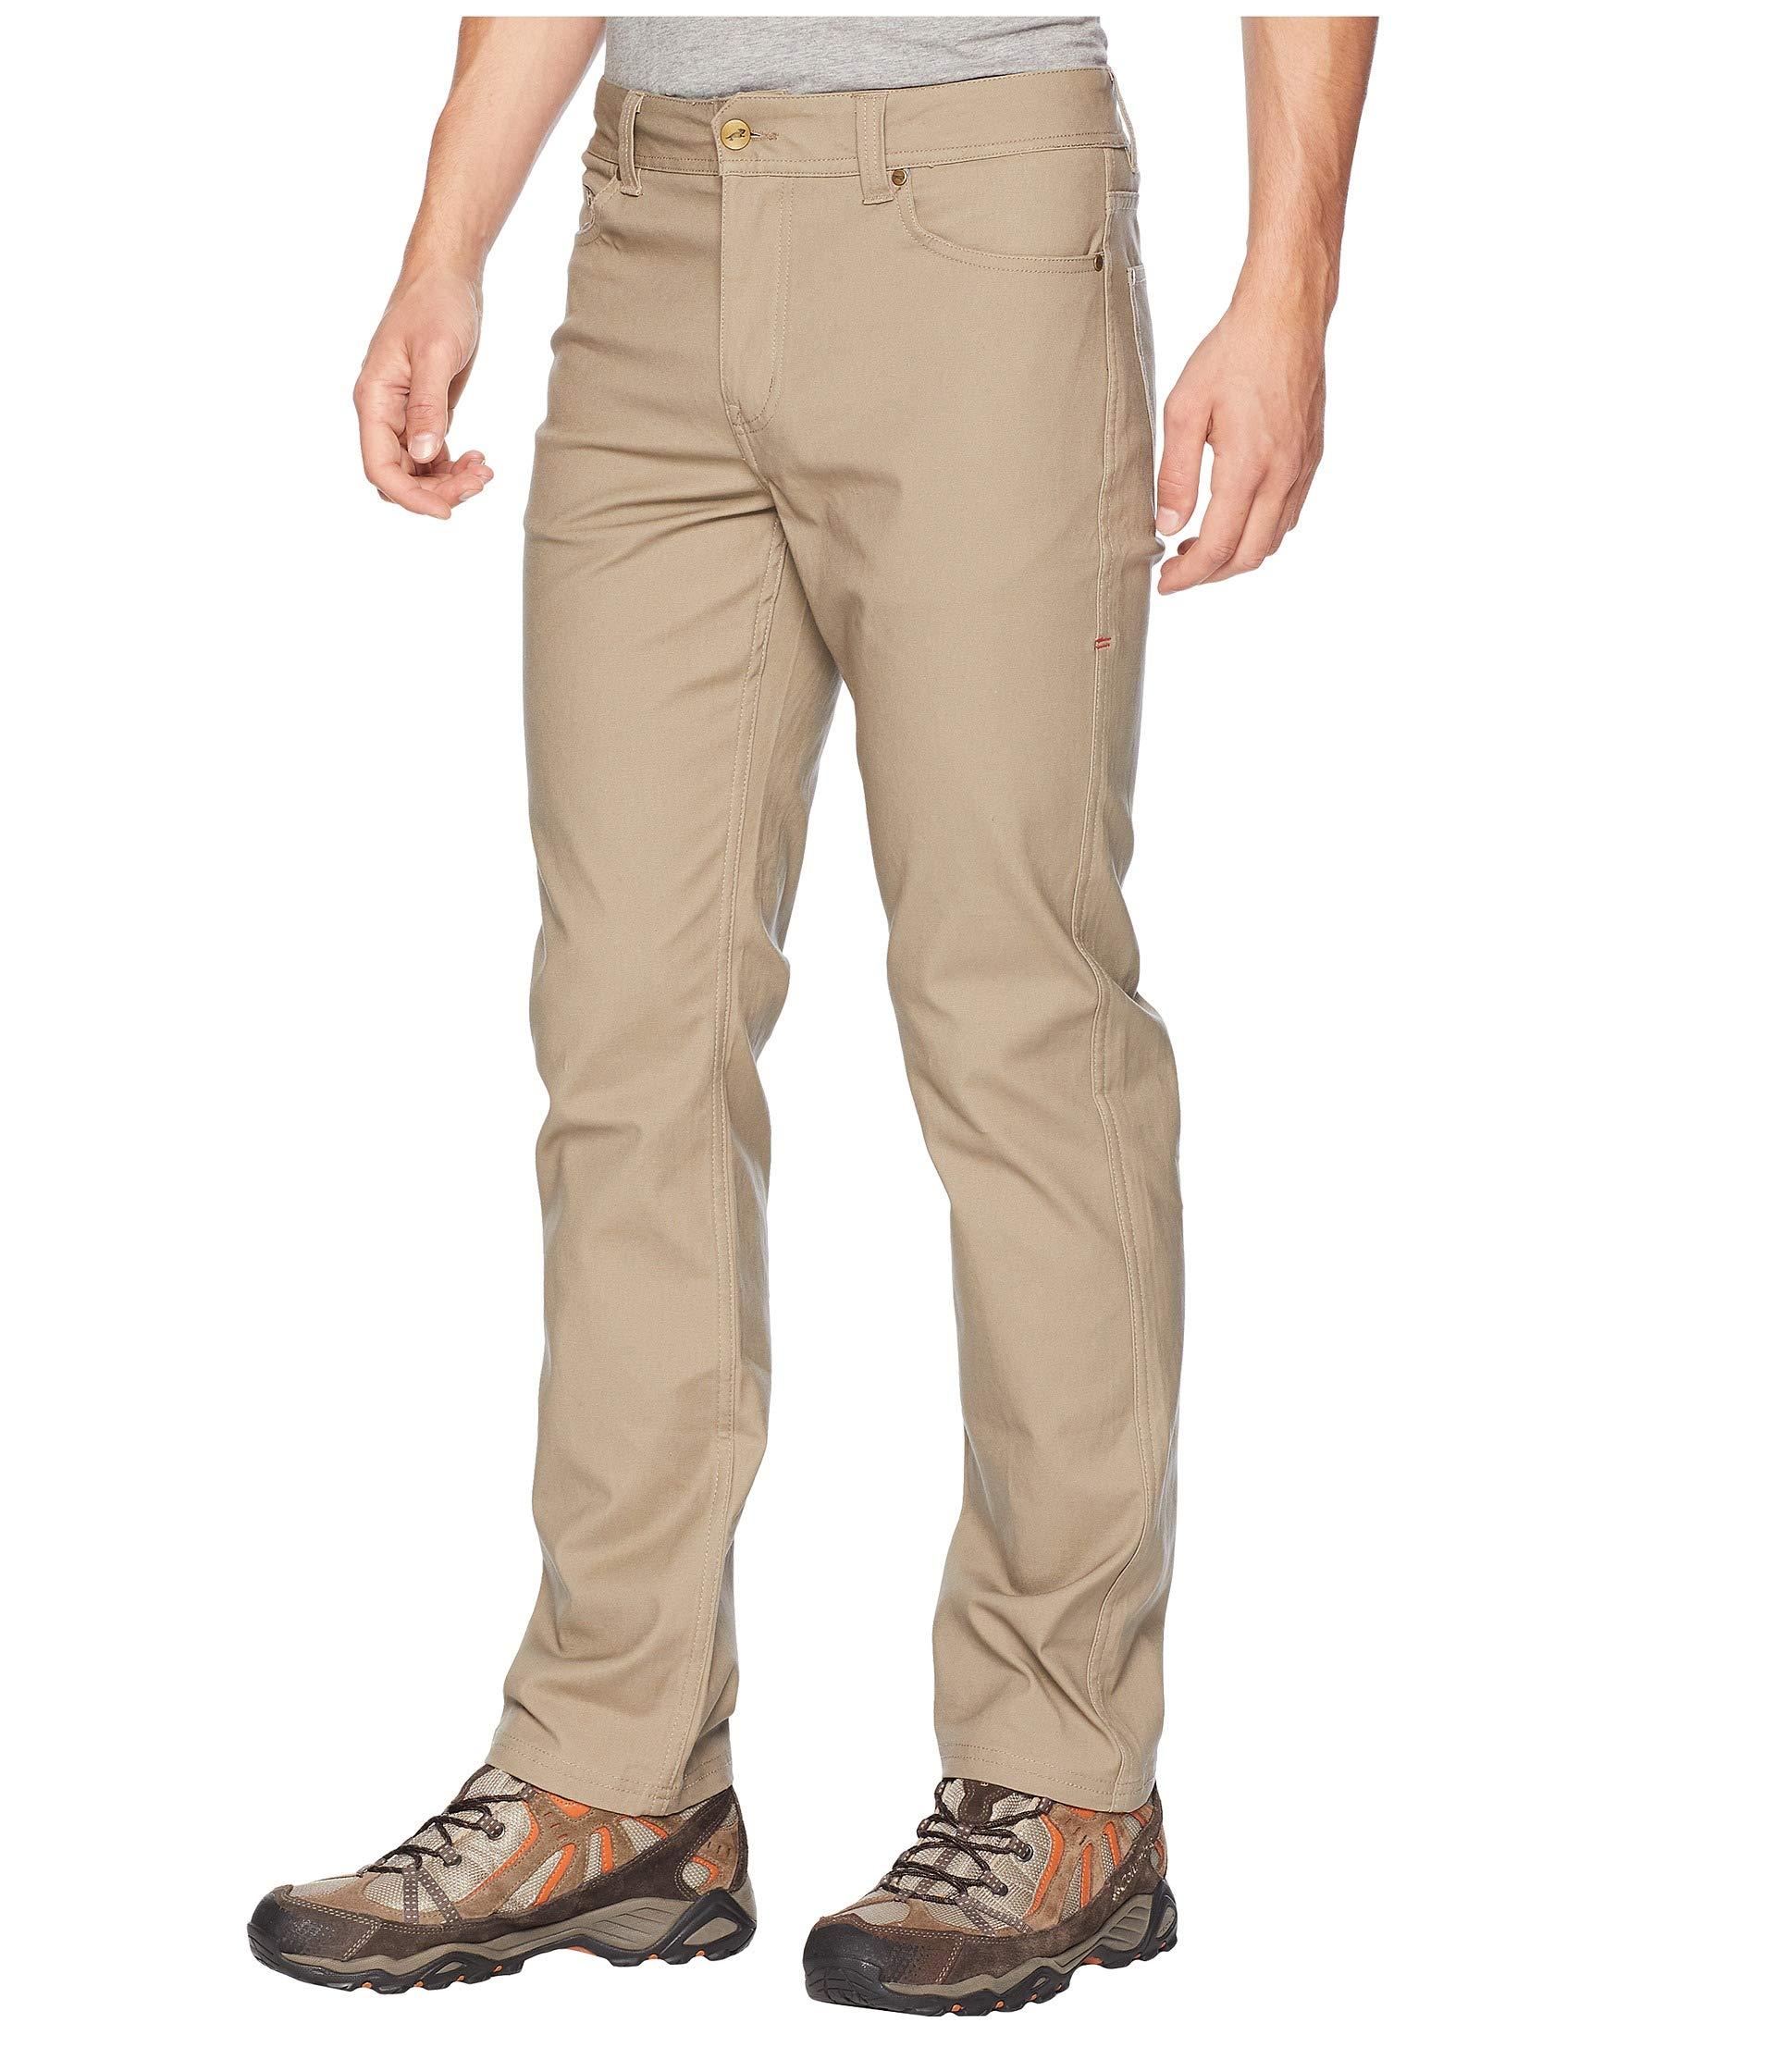 Toad&Co Seward Canvas Pants in Natural for Men - Lyst